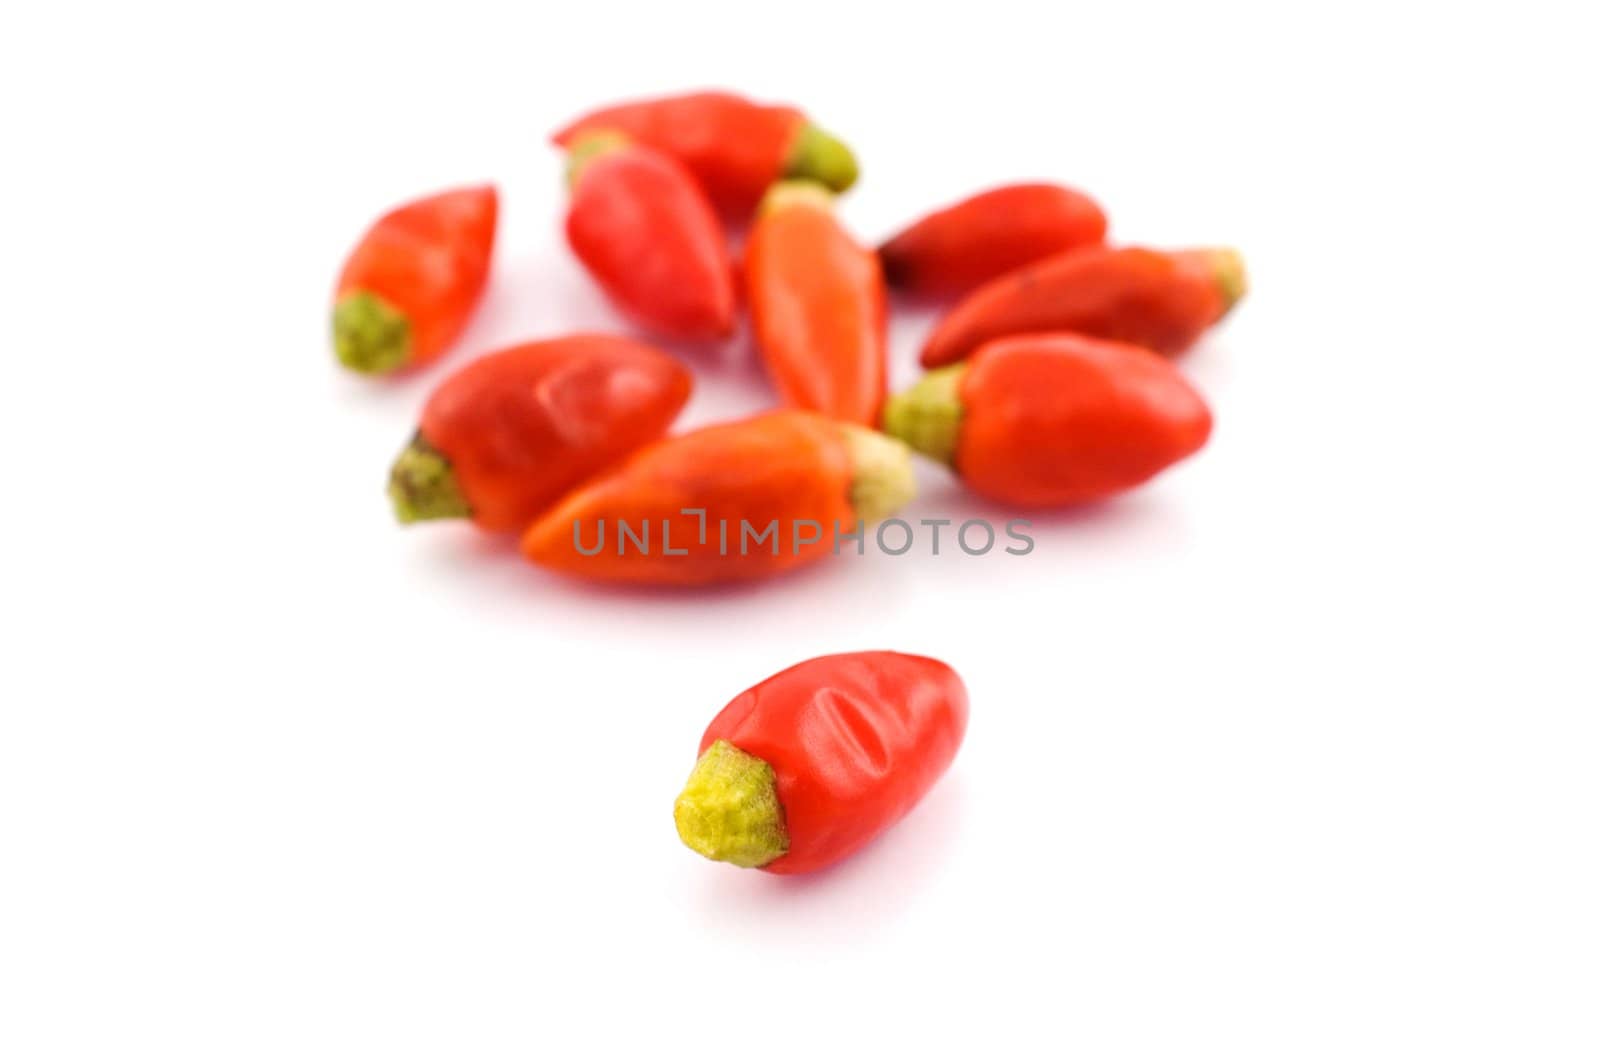 Chili peppers by sil